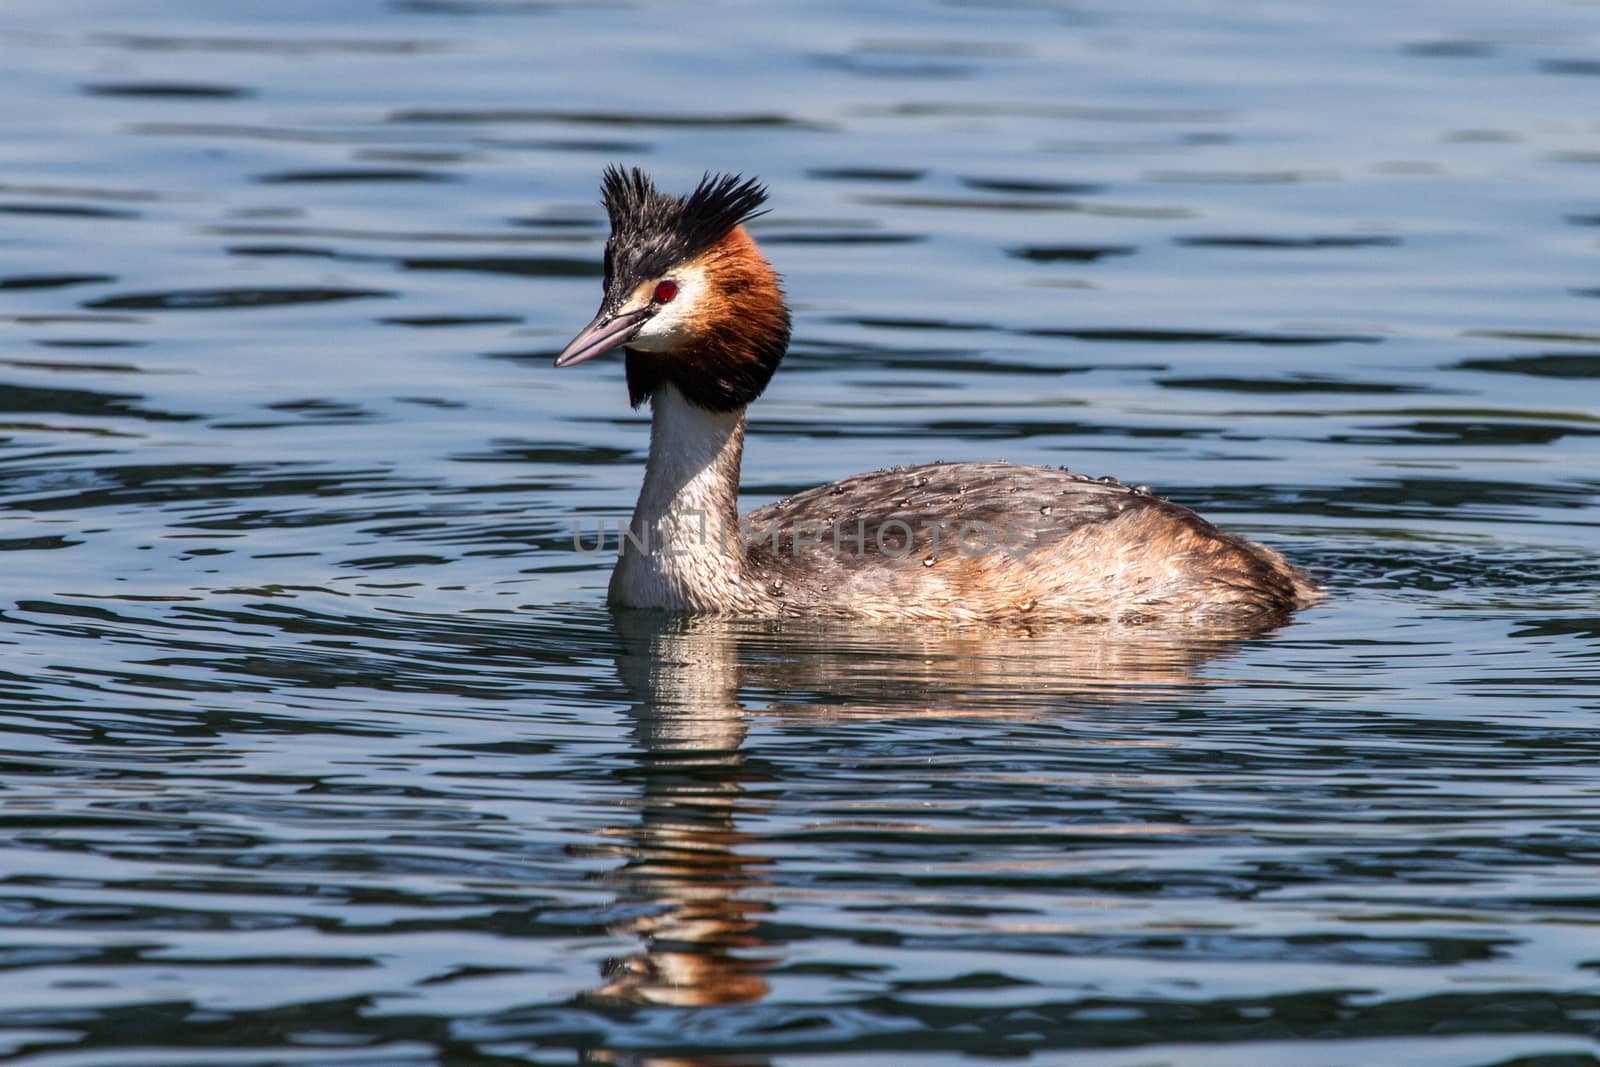 Great Crested Grebe(Podiceps cristatus) photographed in Sesto Calende on the Maggiore lake in Italy.